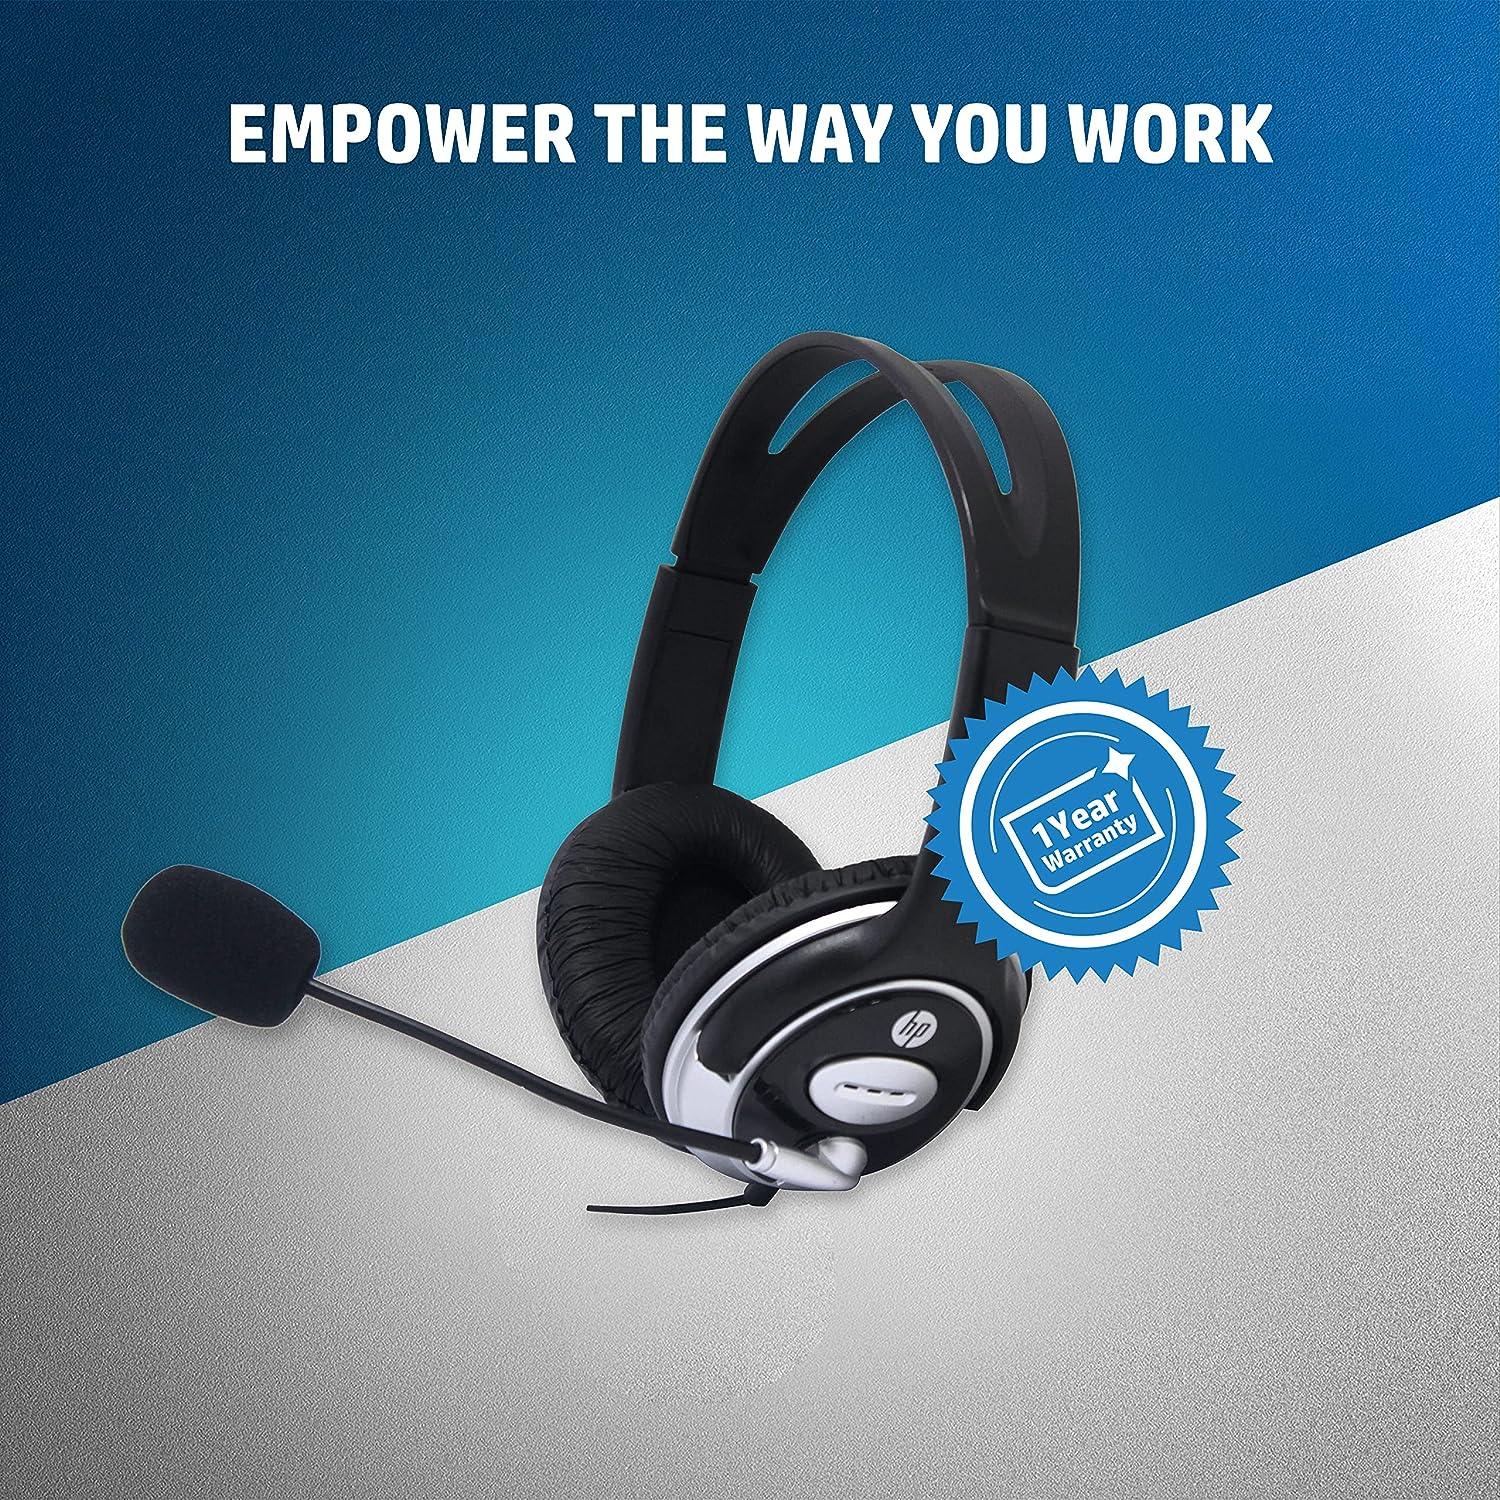 Hp Wired On Ear Headphones With Mic In-Built Noise Cancelling, Foldable (B4B09Pa) - GADGET WAGON Headphones & Headsets